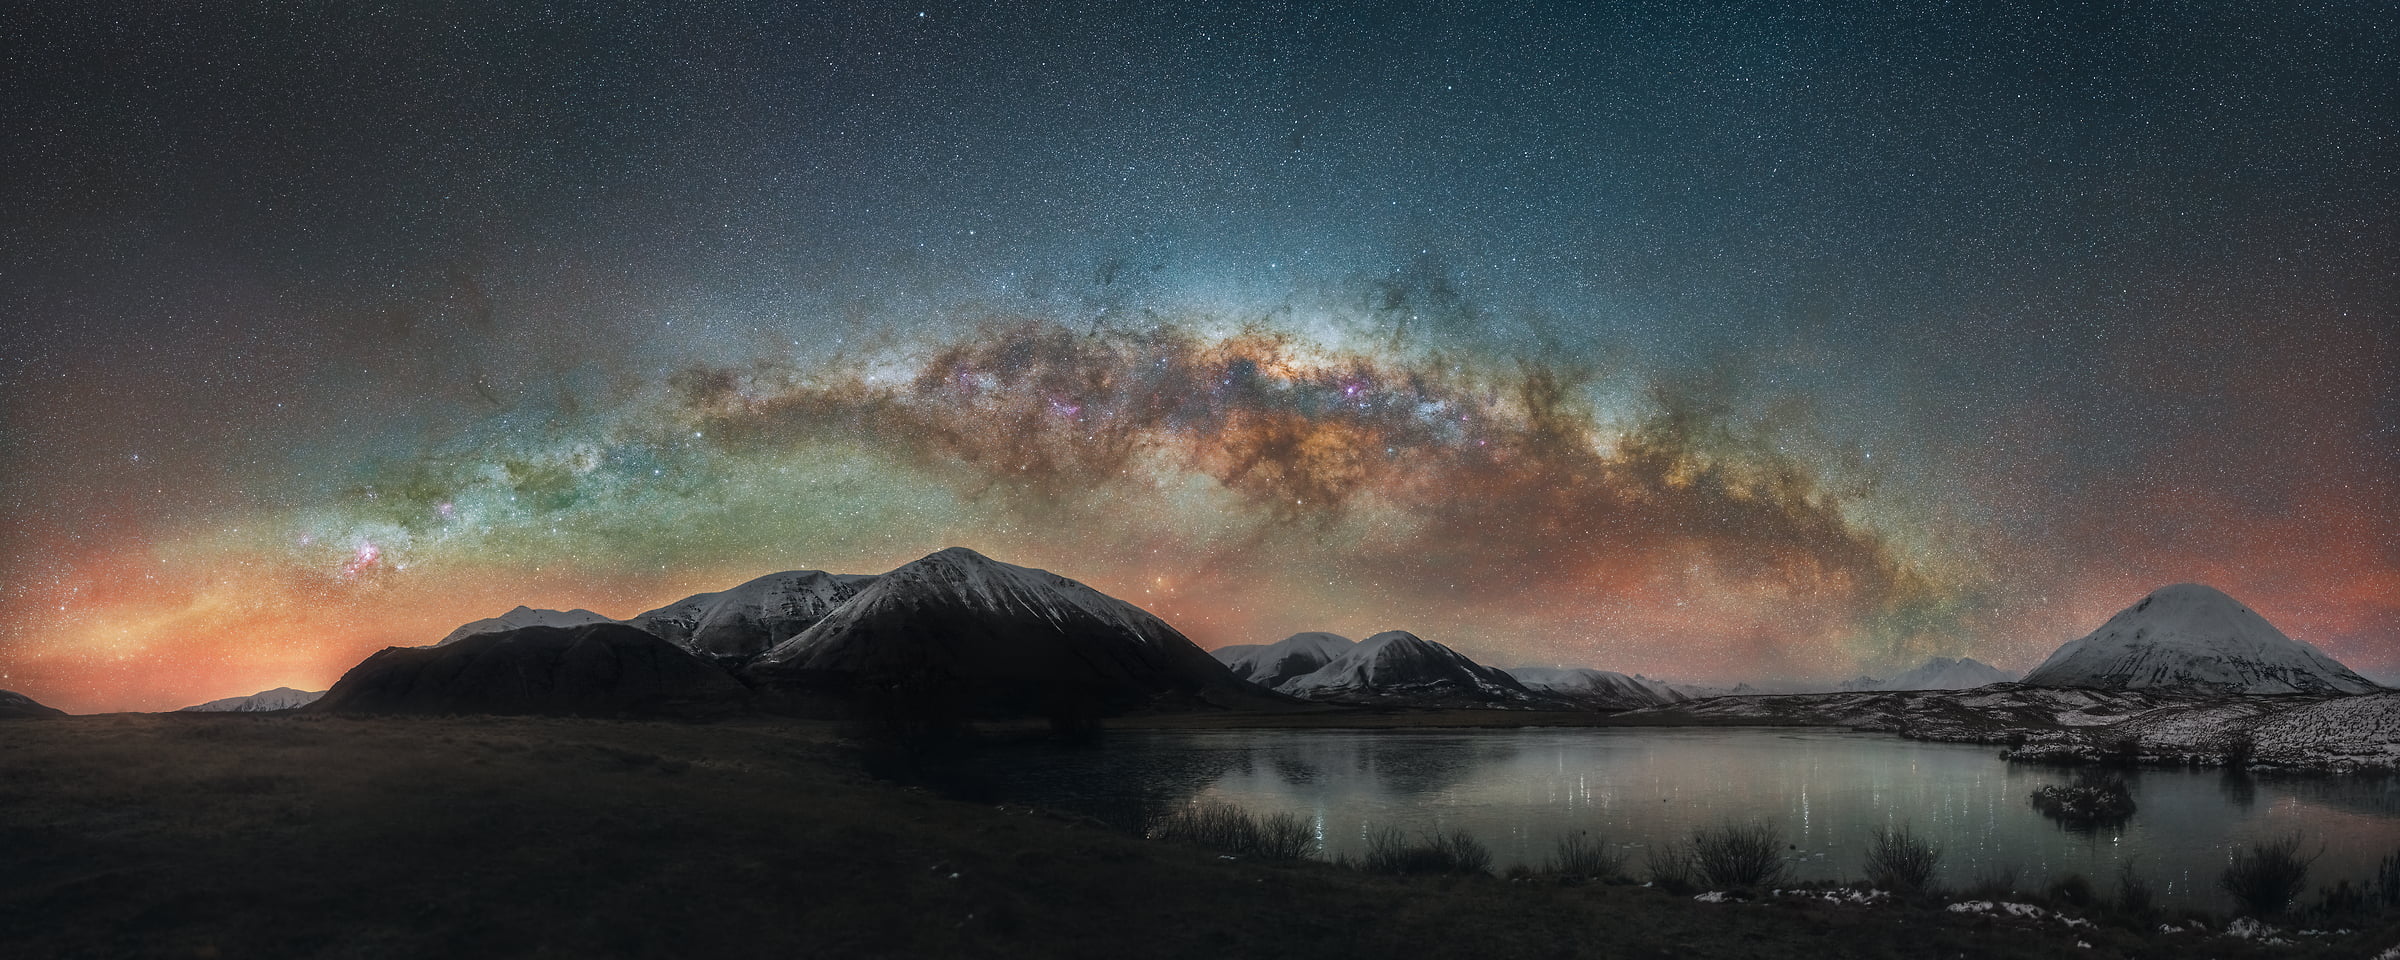 301 megapixels! A very high resolution, large-format VAST photo print of the night sky, milky way, and stars over mountains and a lake; fine art astrophotography landscape photo created by Paul Wilson in Lake Roundabout, New Zealand.